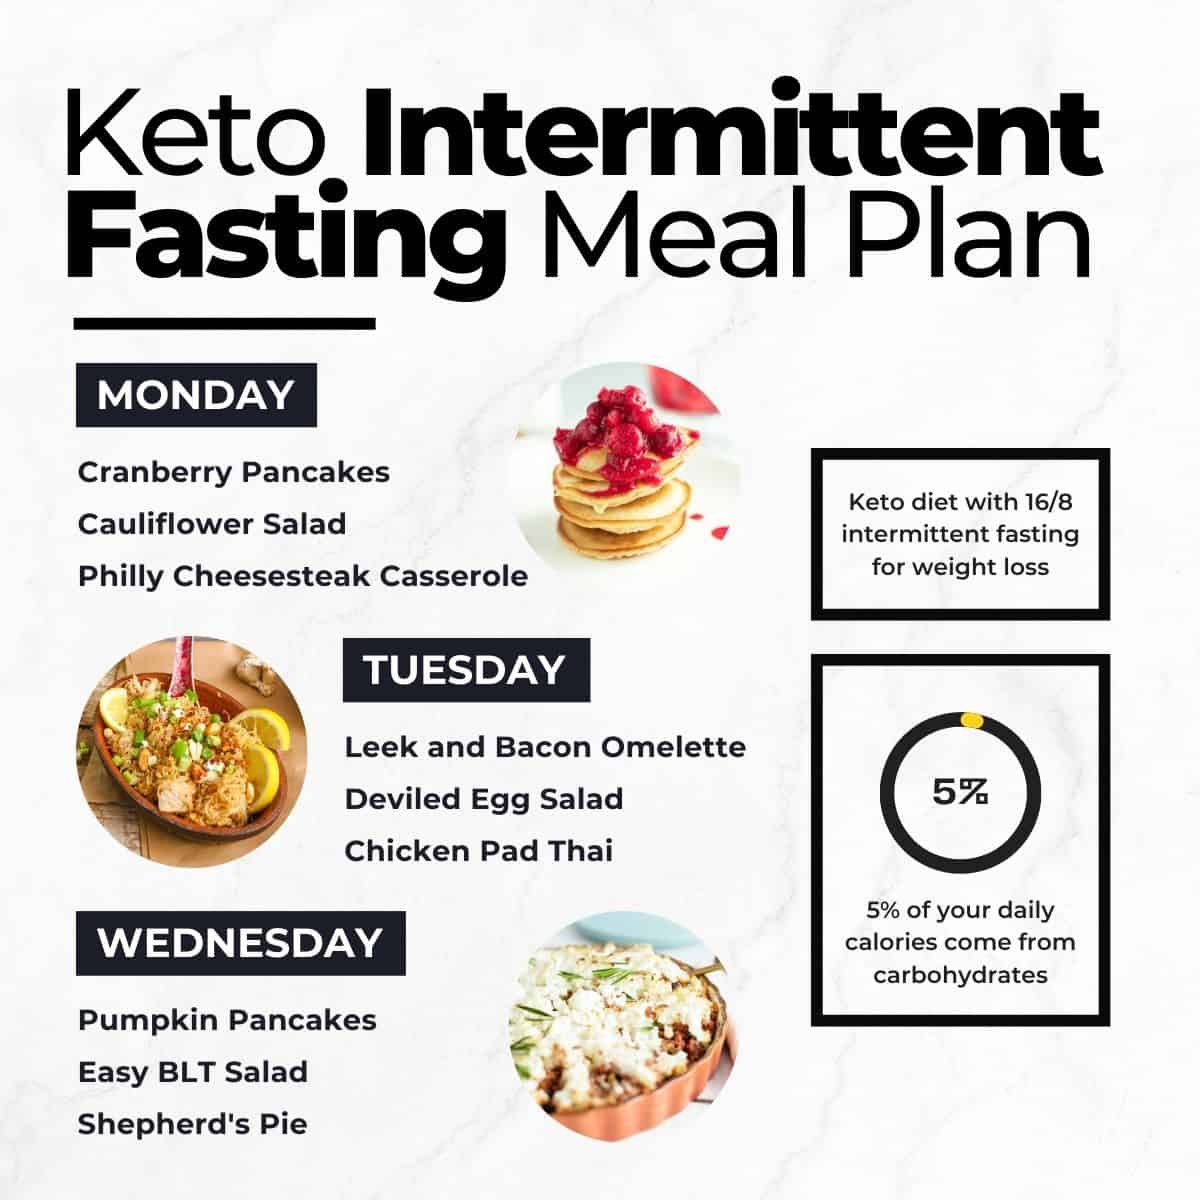 Keto Diet Plan: 7 Days Menu with Foods to Eat & Avoid